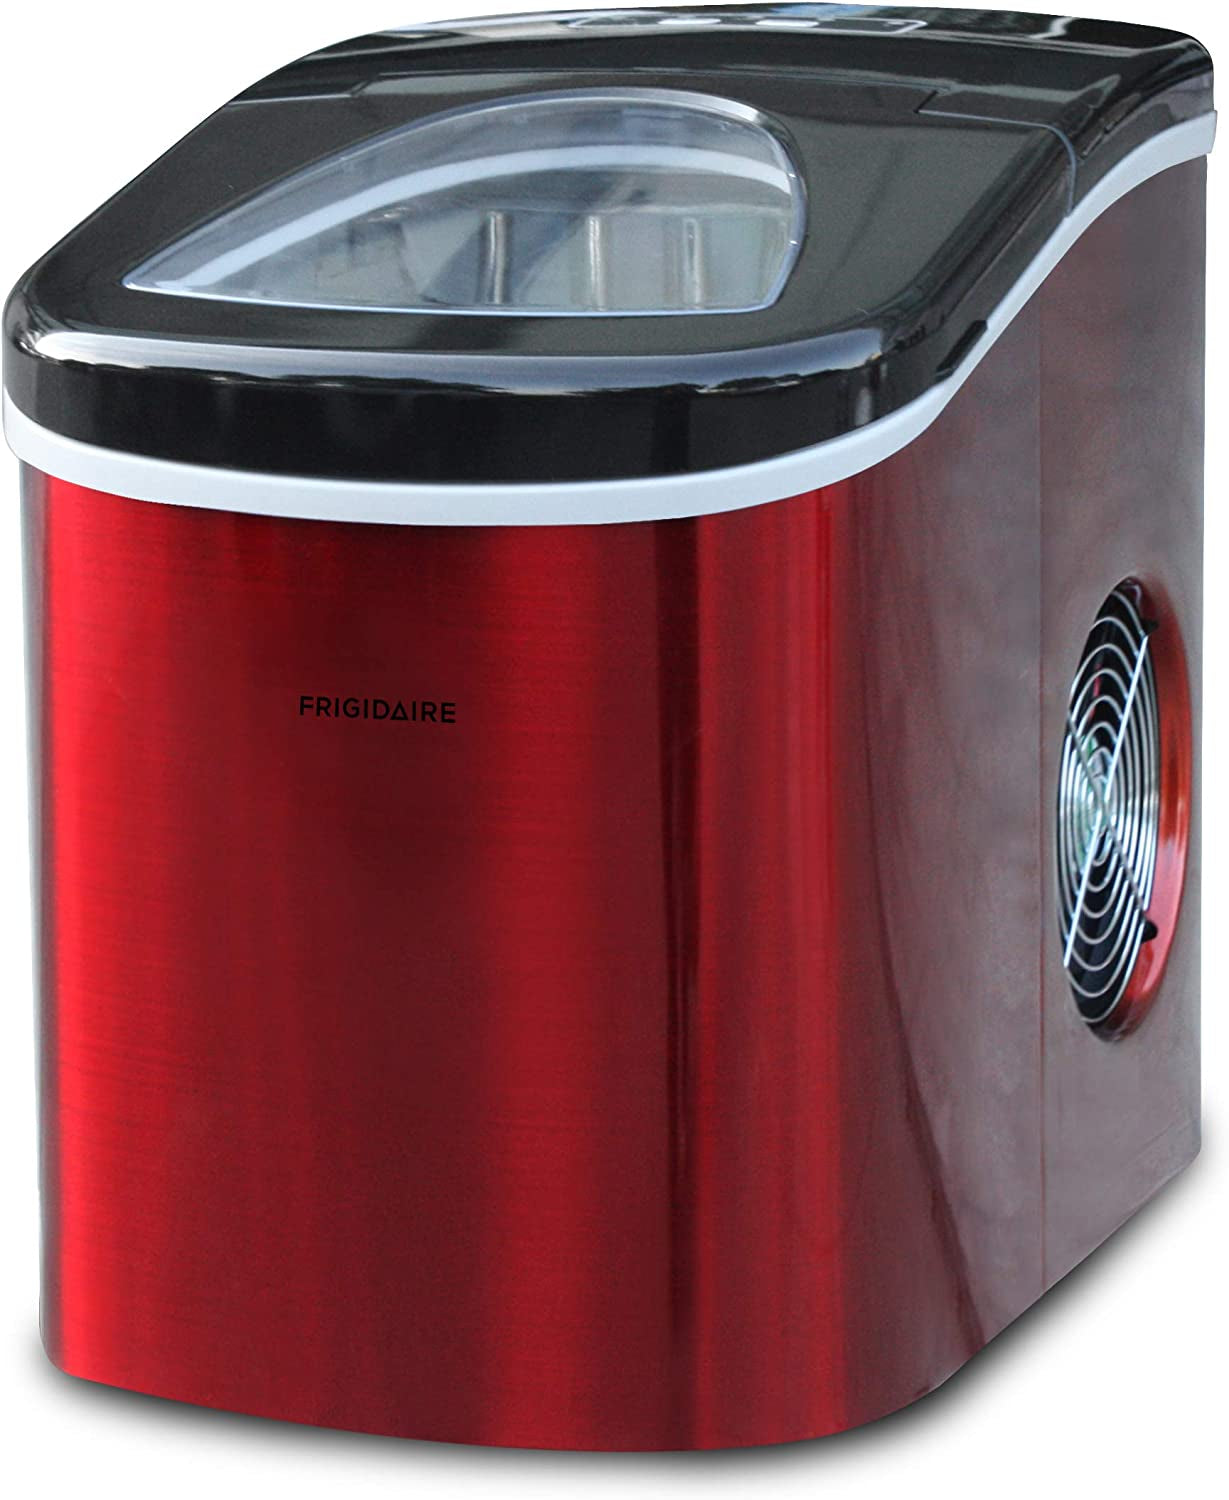 Stainless Steel Ice Maker, 26Lb per Day, RED STAINLESS